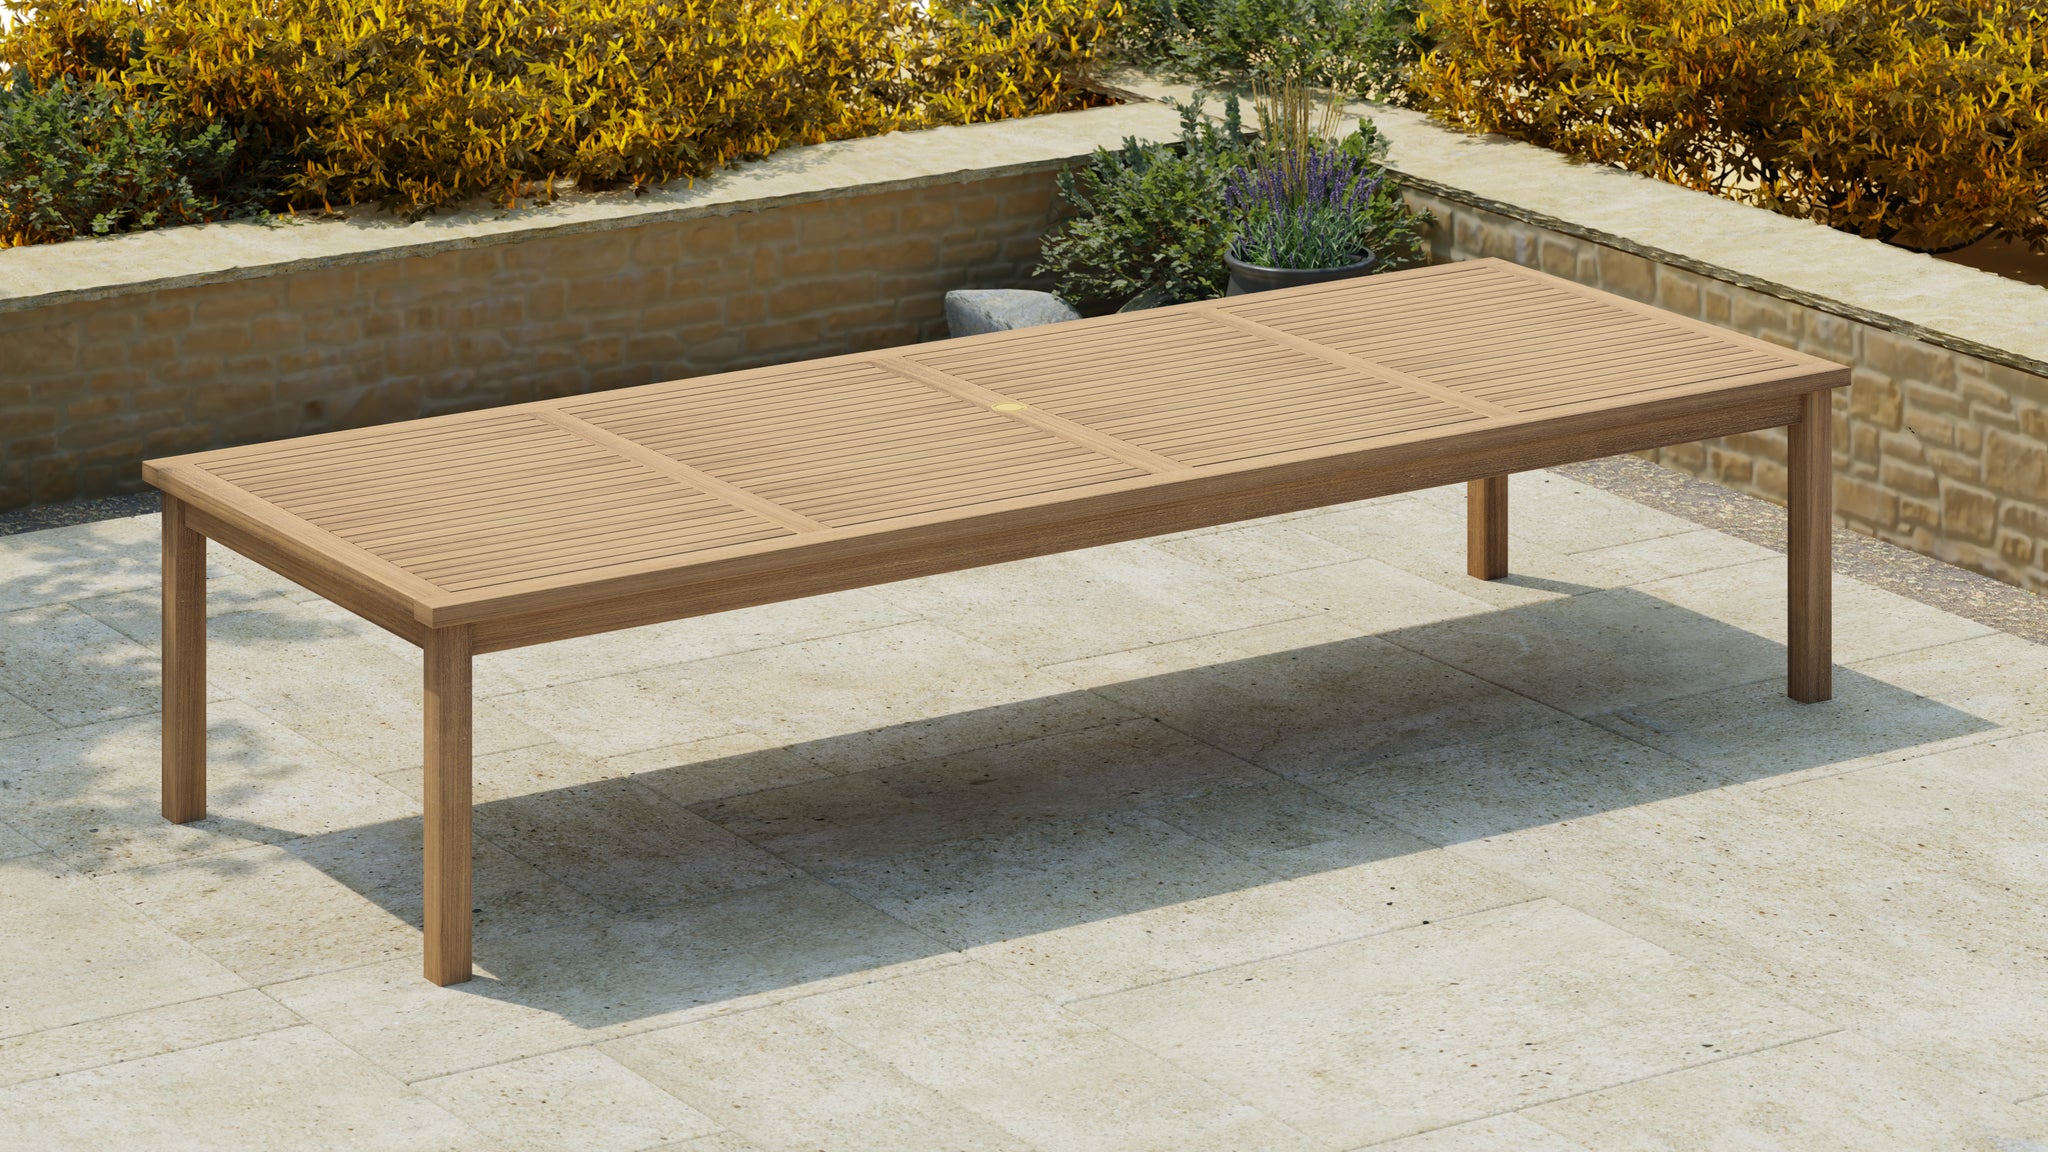 130x350cm Fixed Rectangular Table with Parasol Hole